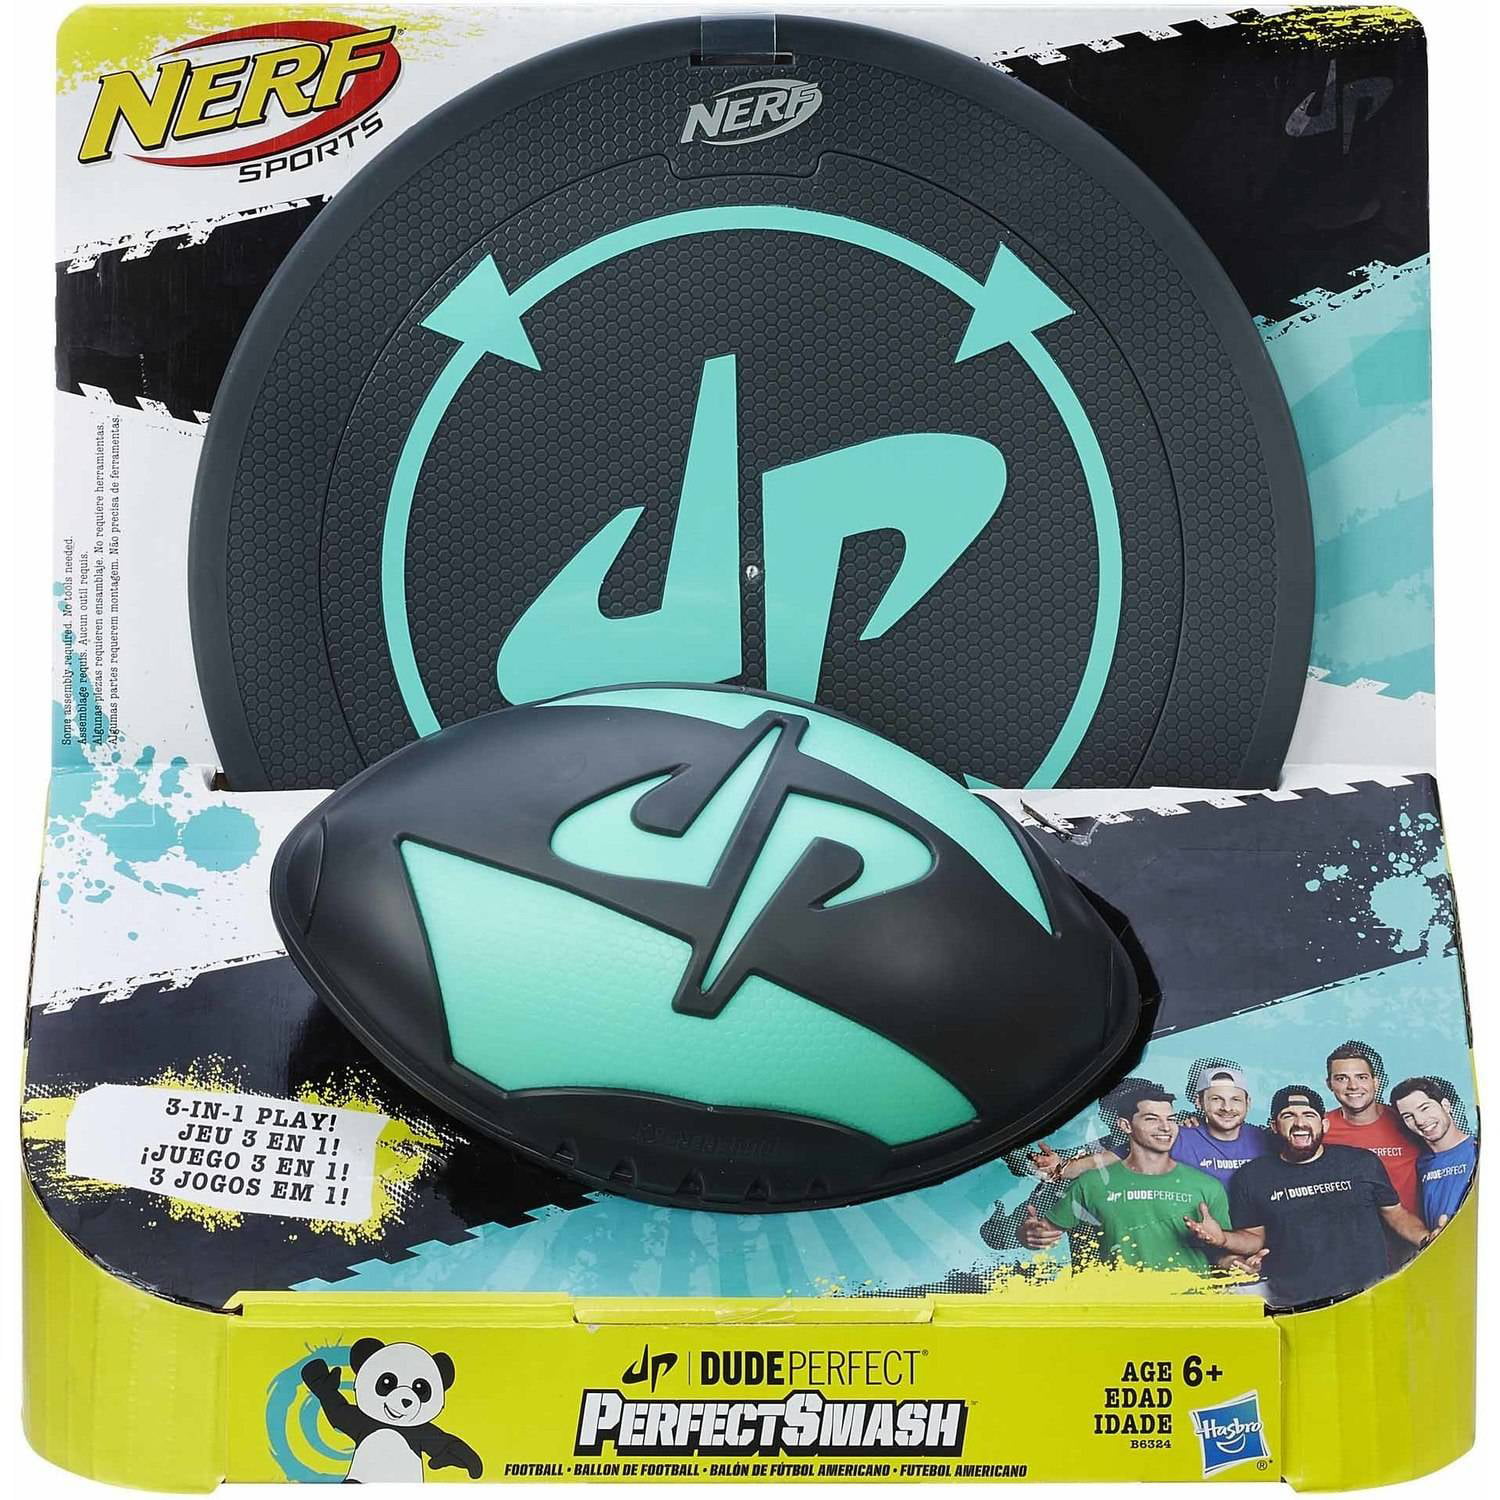 jern Squeak Frastøde Nerf Sports Dude Perfect PerfectSmash Football, for Kids Ages 6 and Up -  Walmart.com